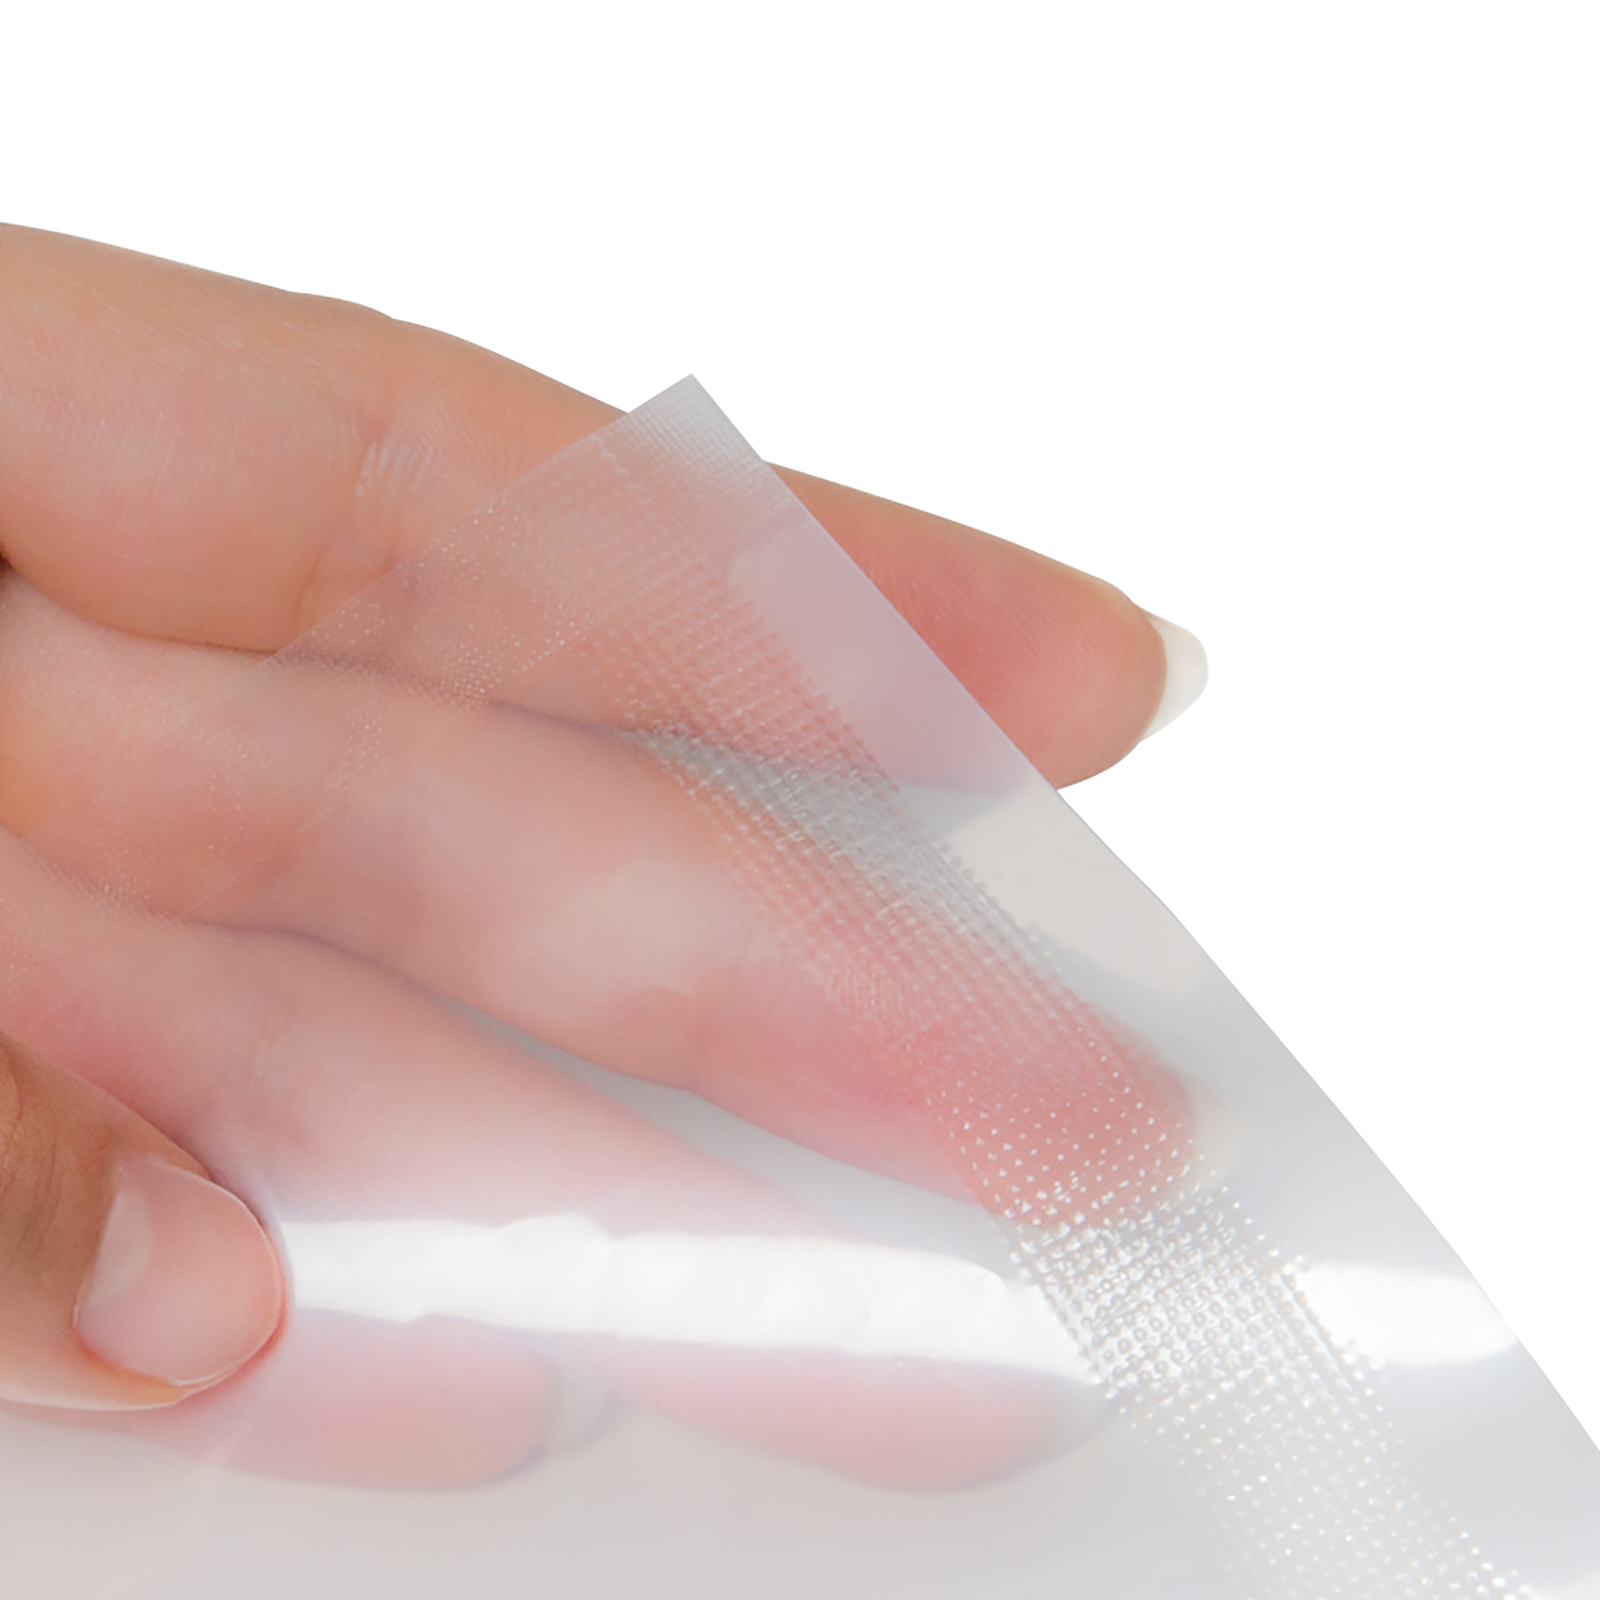 Close up of the hands of a person holding a clear sealed bag after using the JORESTECH continuous band sealer. Picture shows the pattern of the heat sealable bag